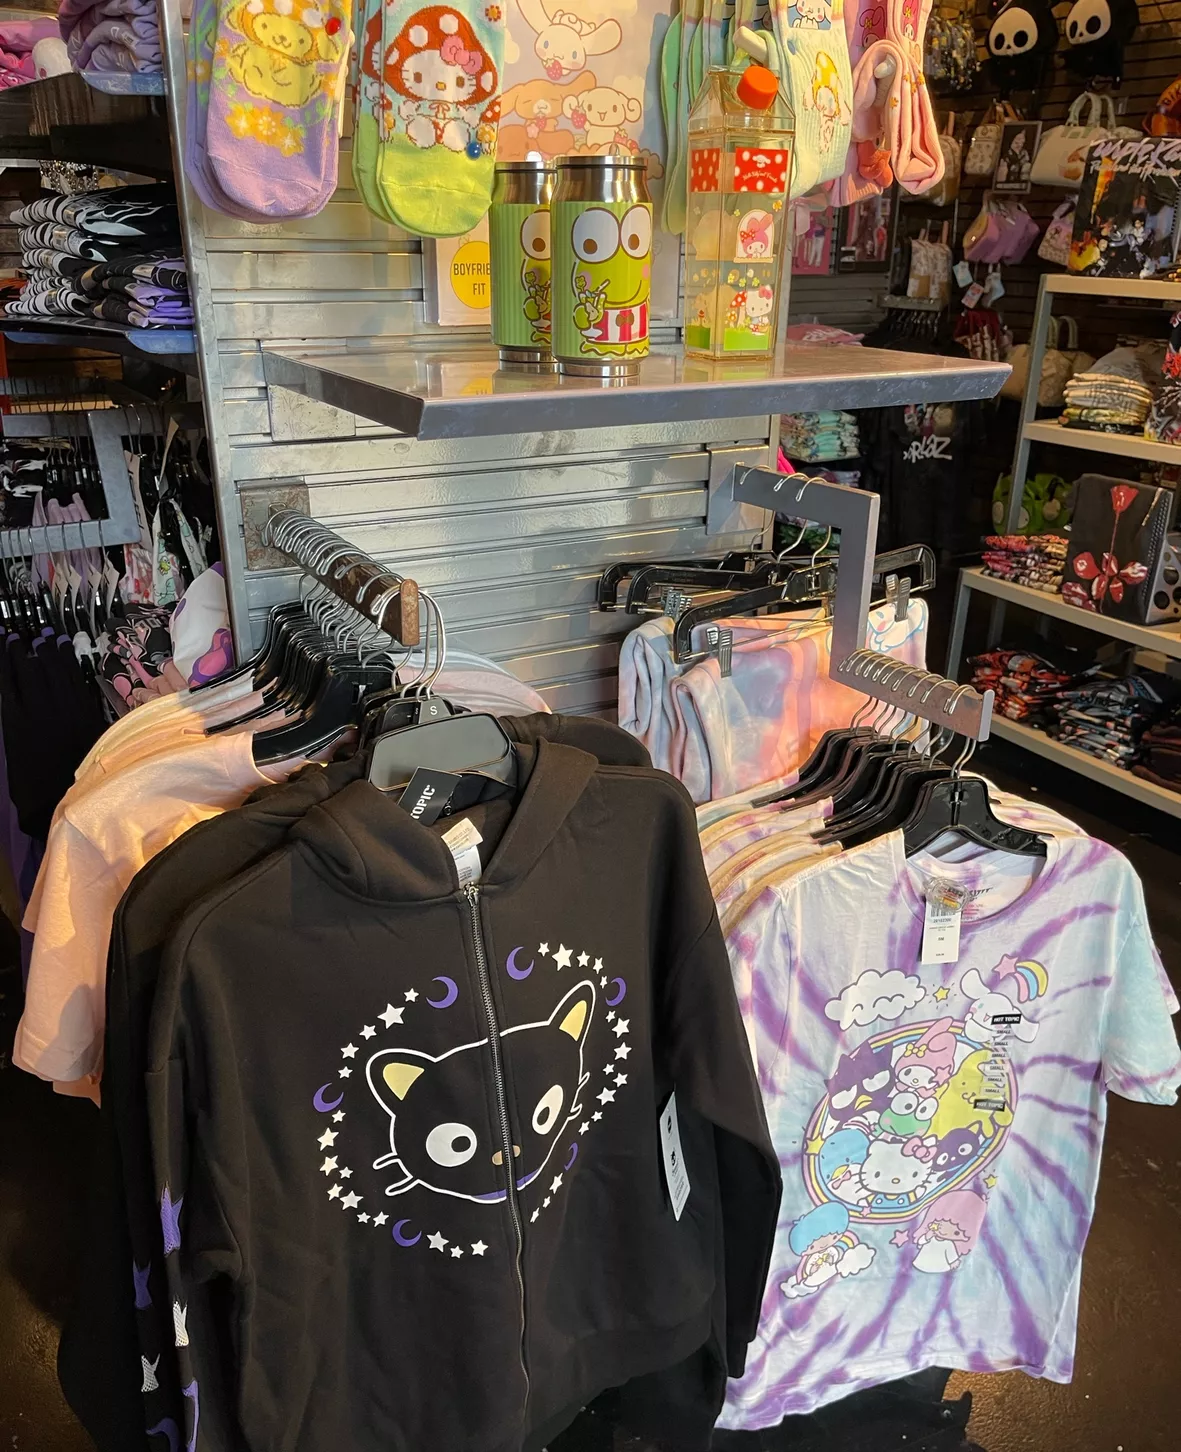 New Sanrio boutique brings official Hello Kitty merchandise to Flushing –